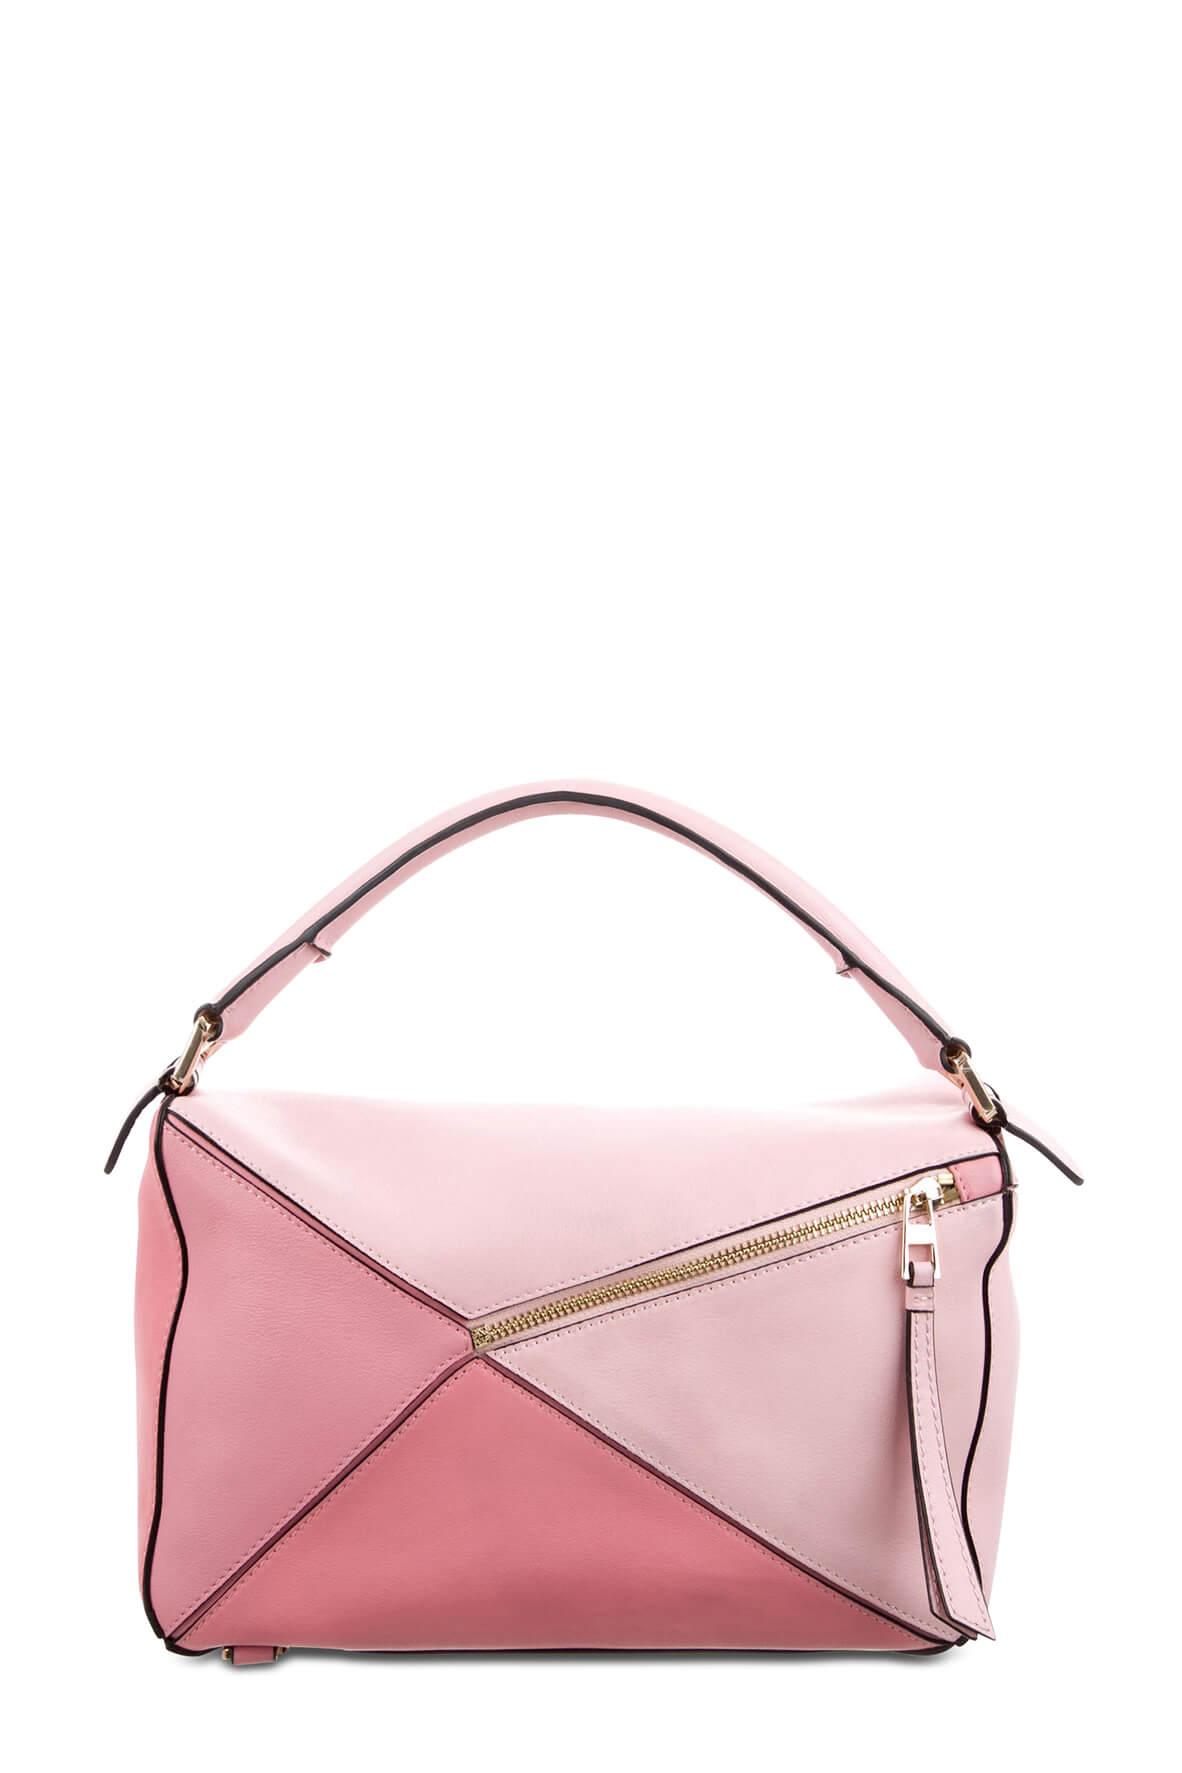 Medium Puzzle Bag Tricolour Pink – Style Theory SG